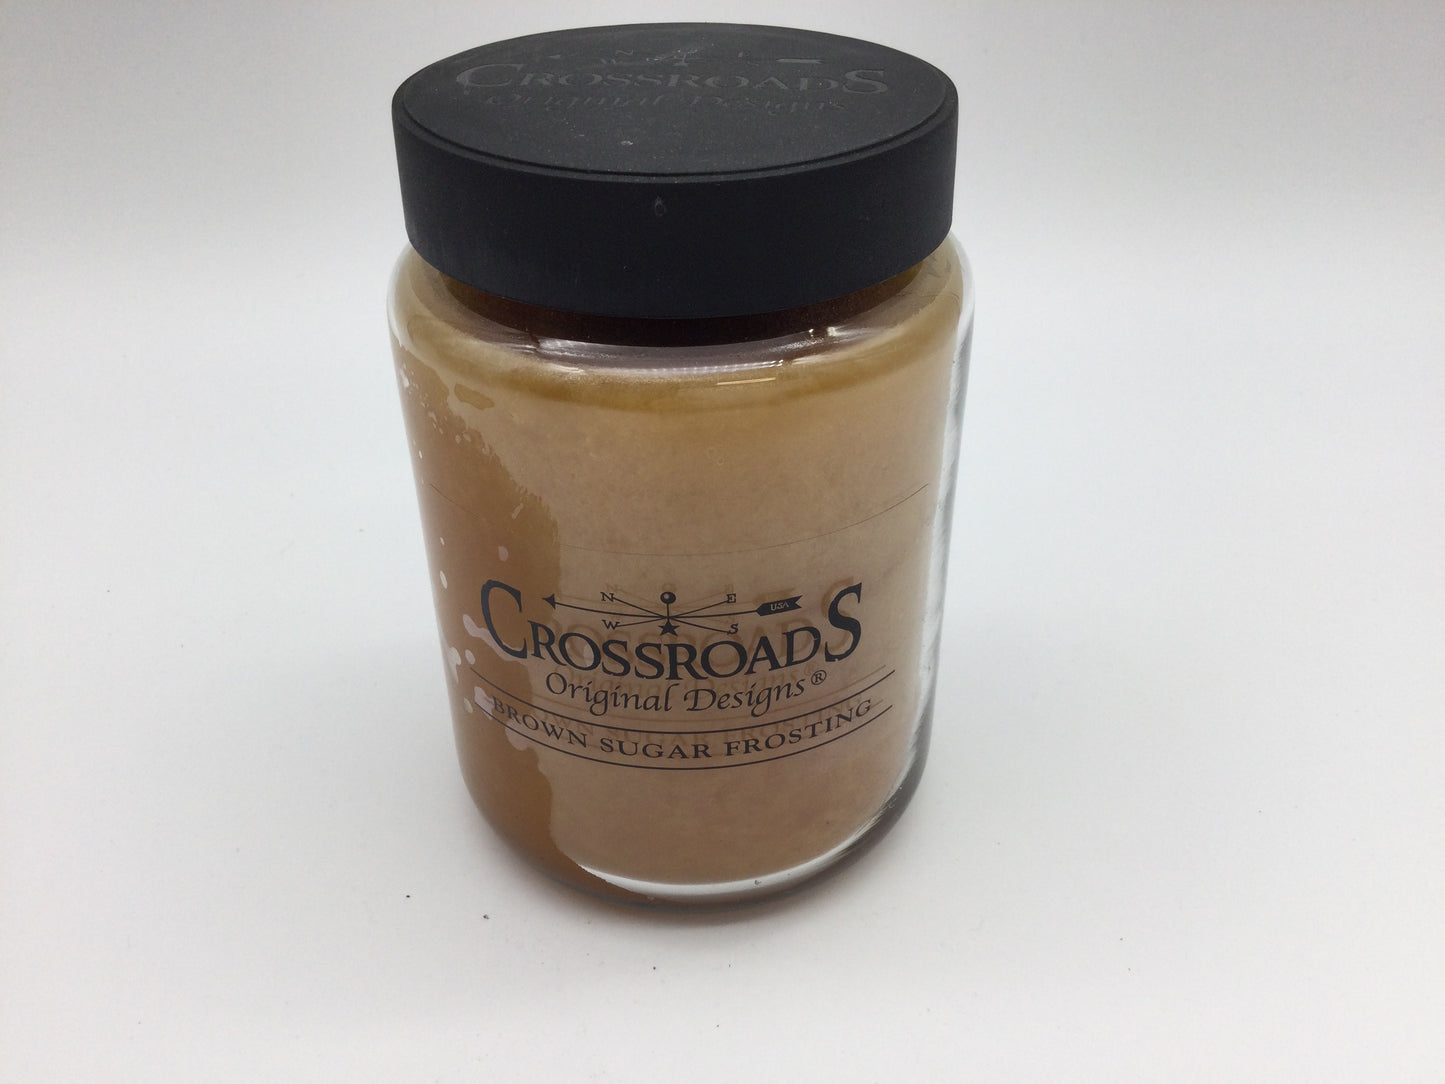 Crossroads Candles - Brown Sugar Frosting